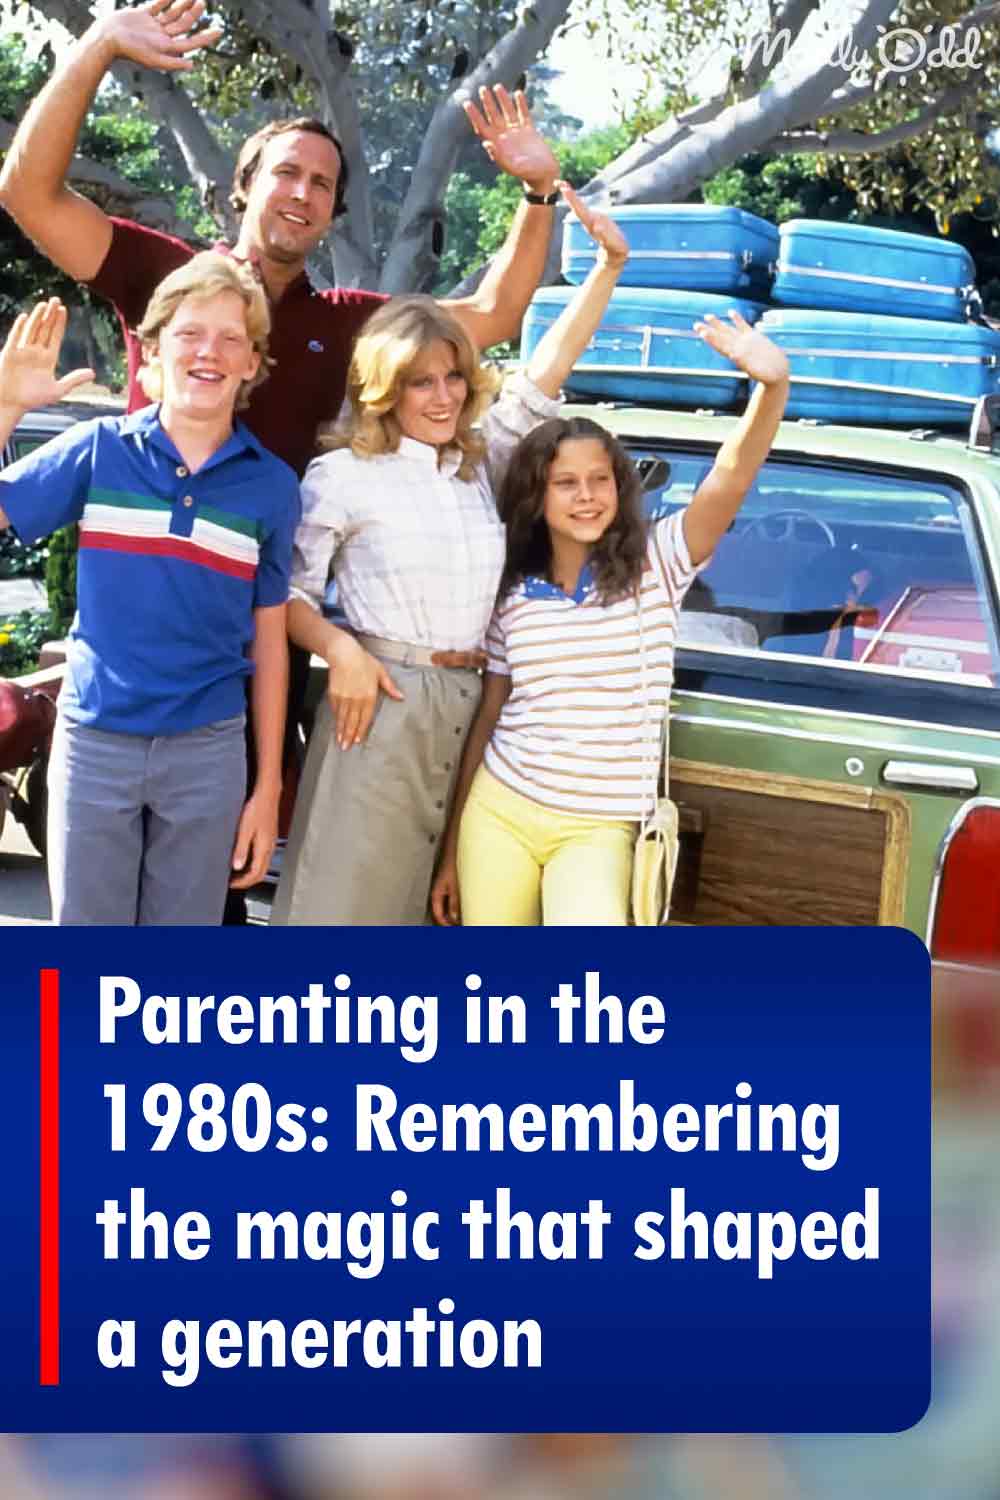 Parenting in the 1980s: Remembering the magic that shaped a generation